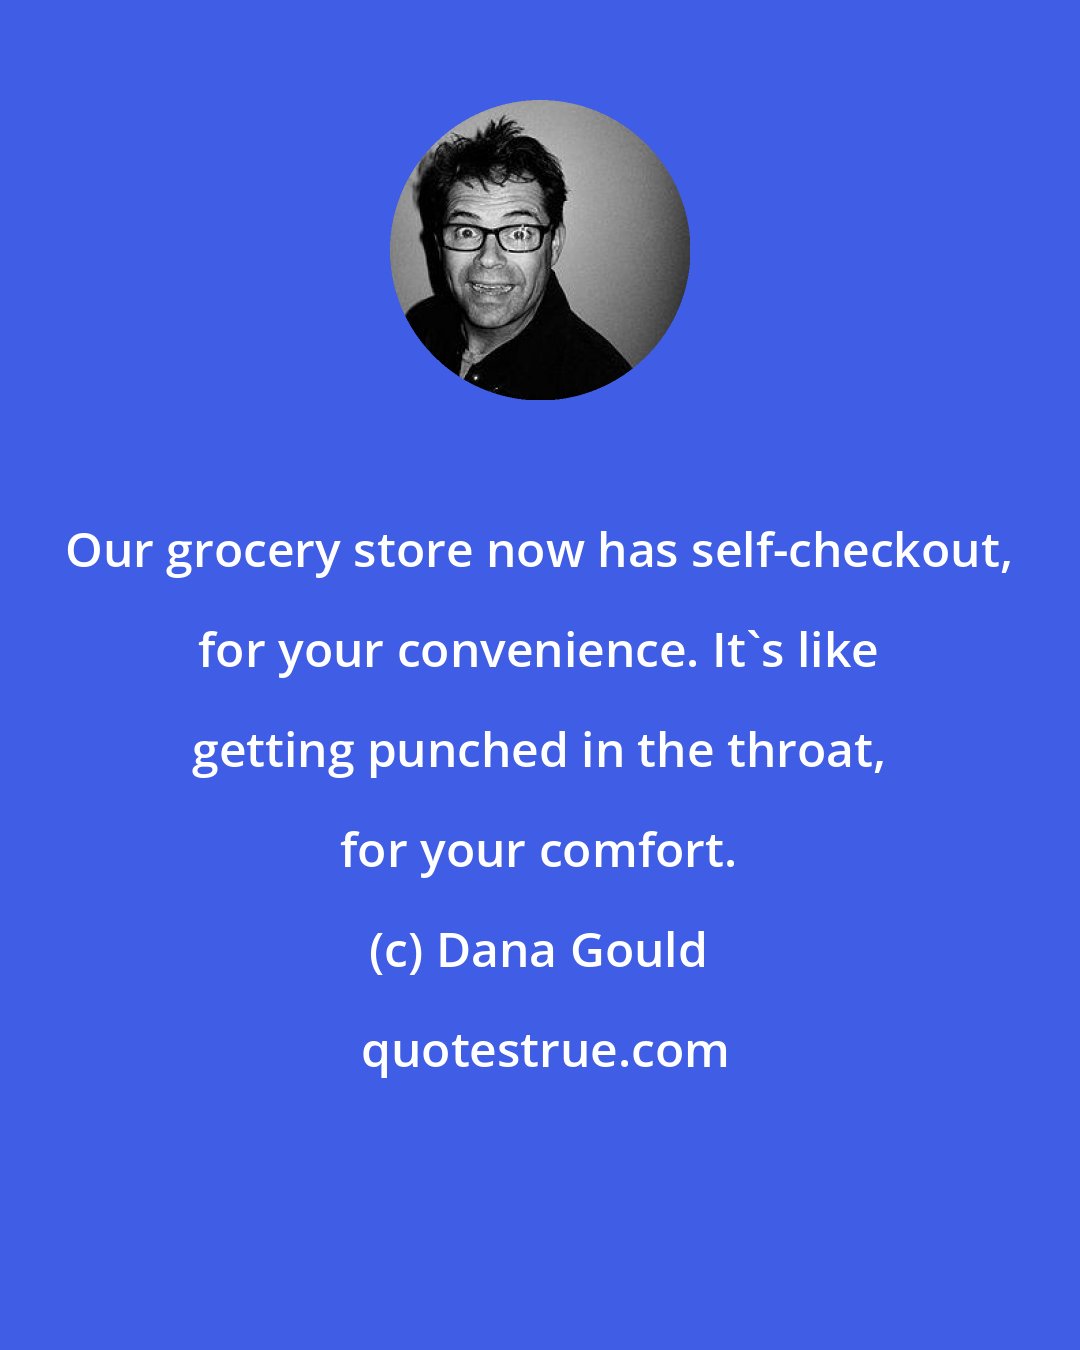 Dana Gould: Our grocery store now has self-checkout, for your convenience. It's like getting punched in the throat, for your comfort.